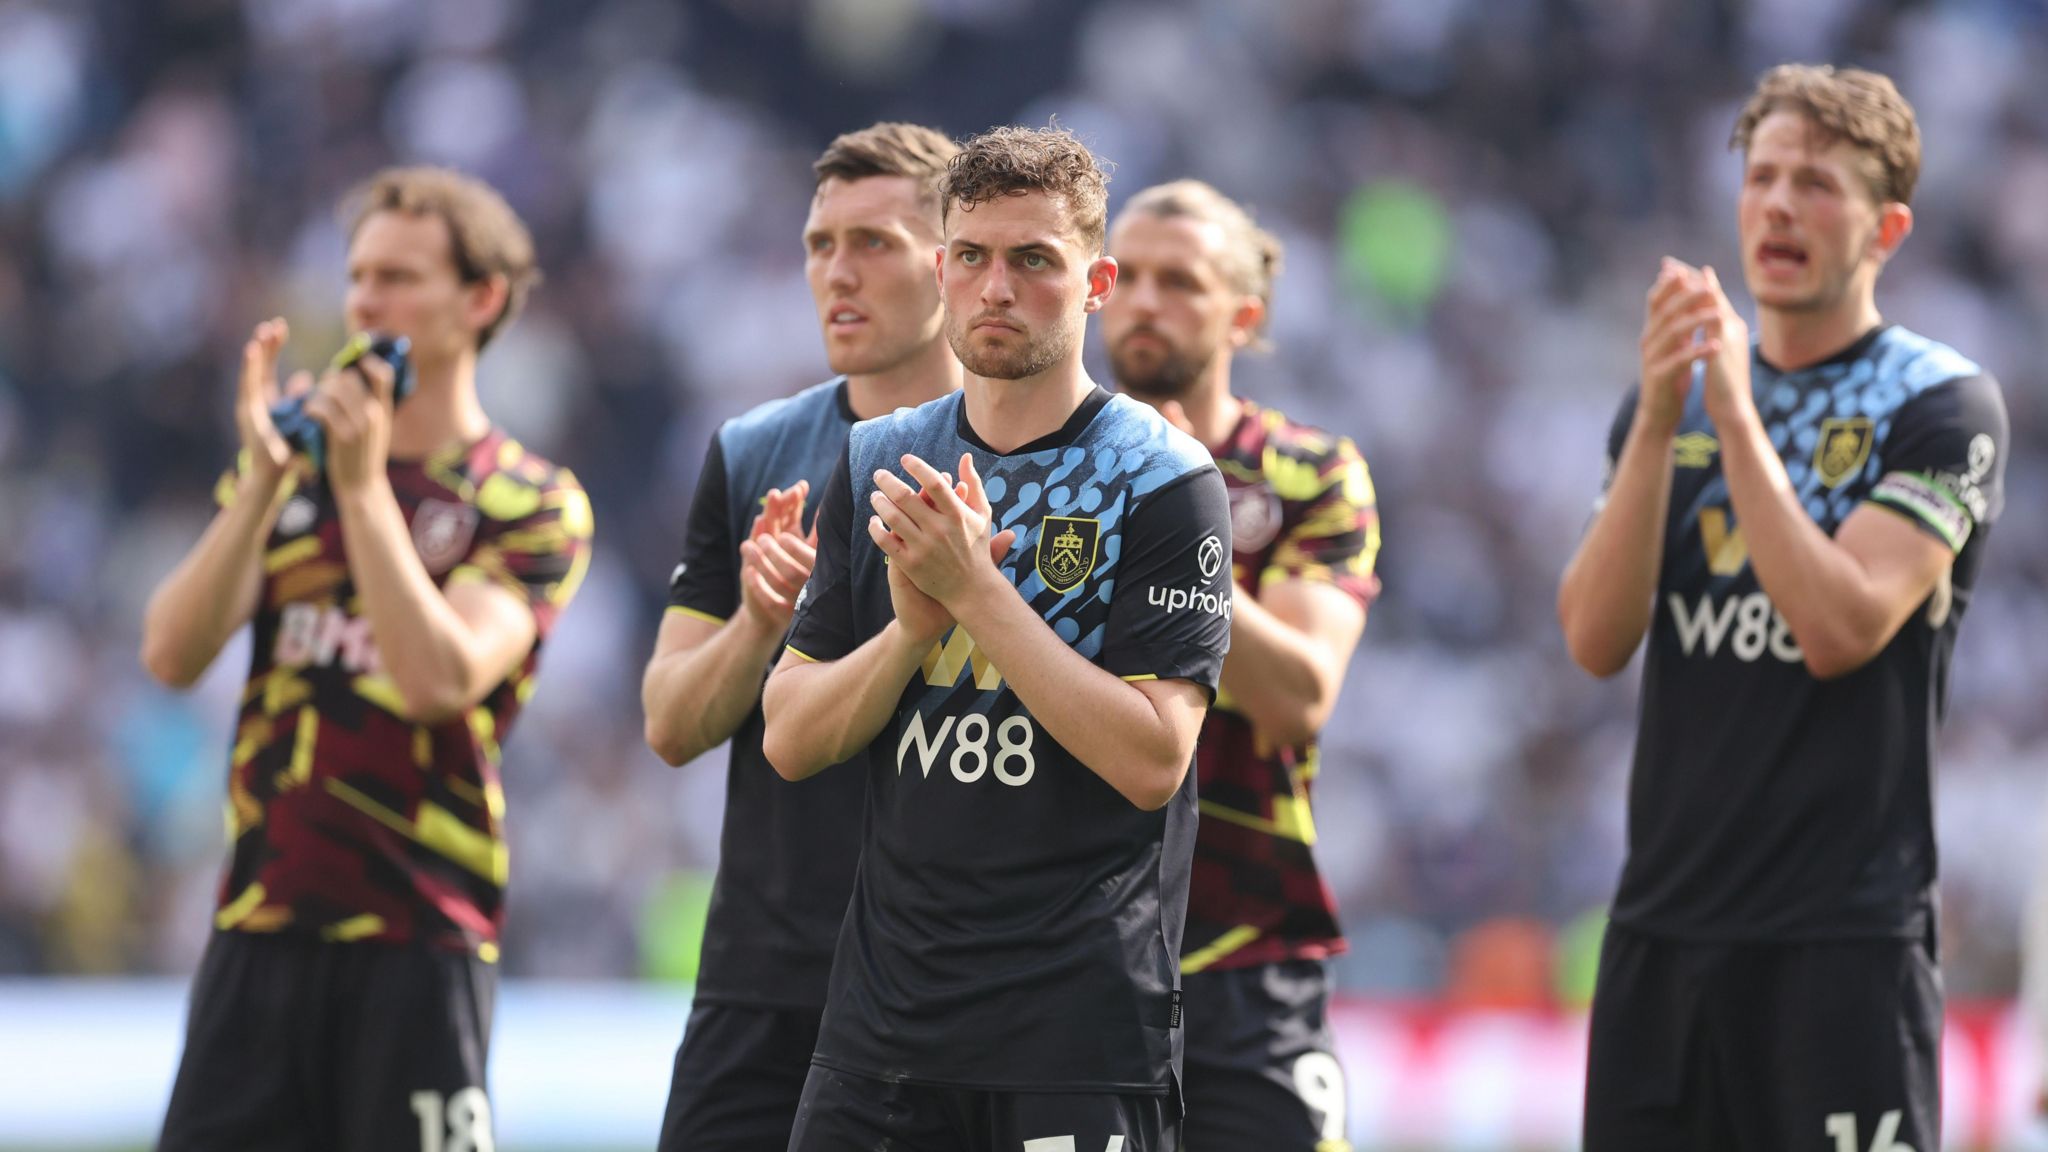 Dejected Burnley players applaud their fans after relegation was confirmed at Spurs